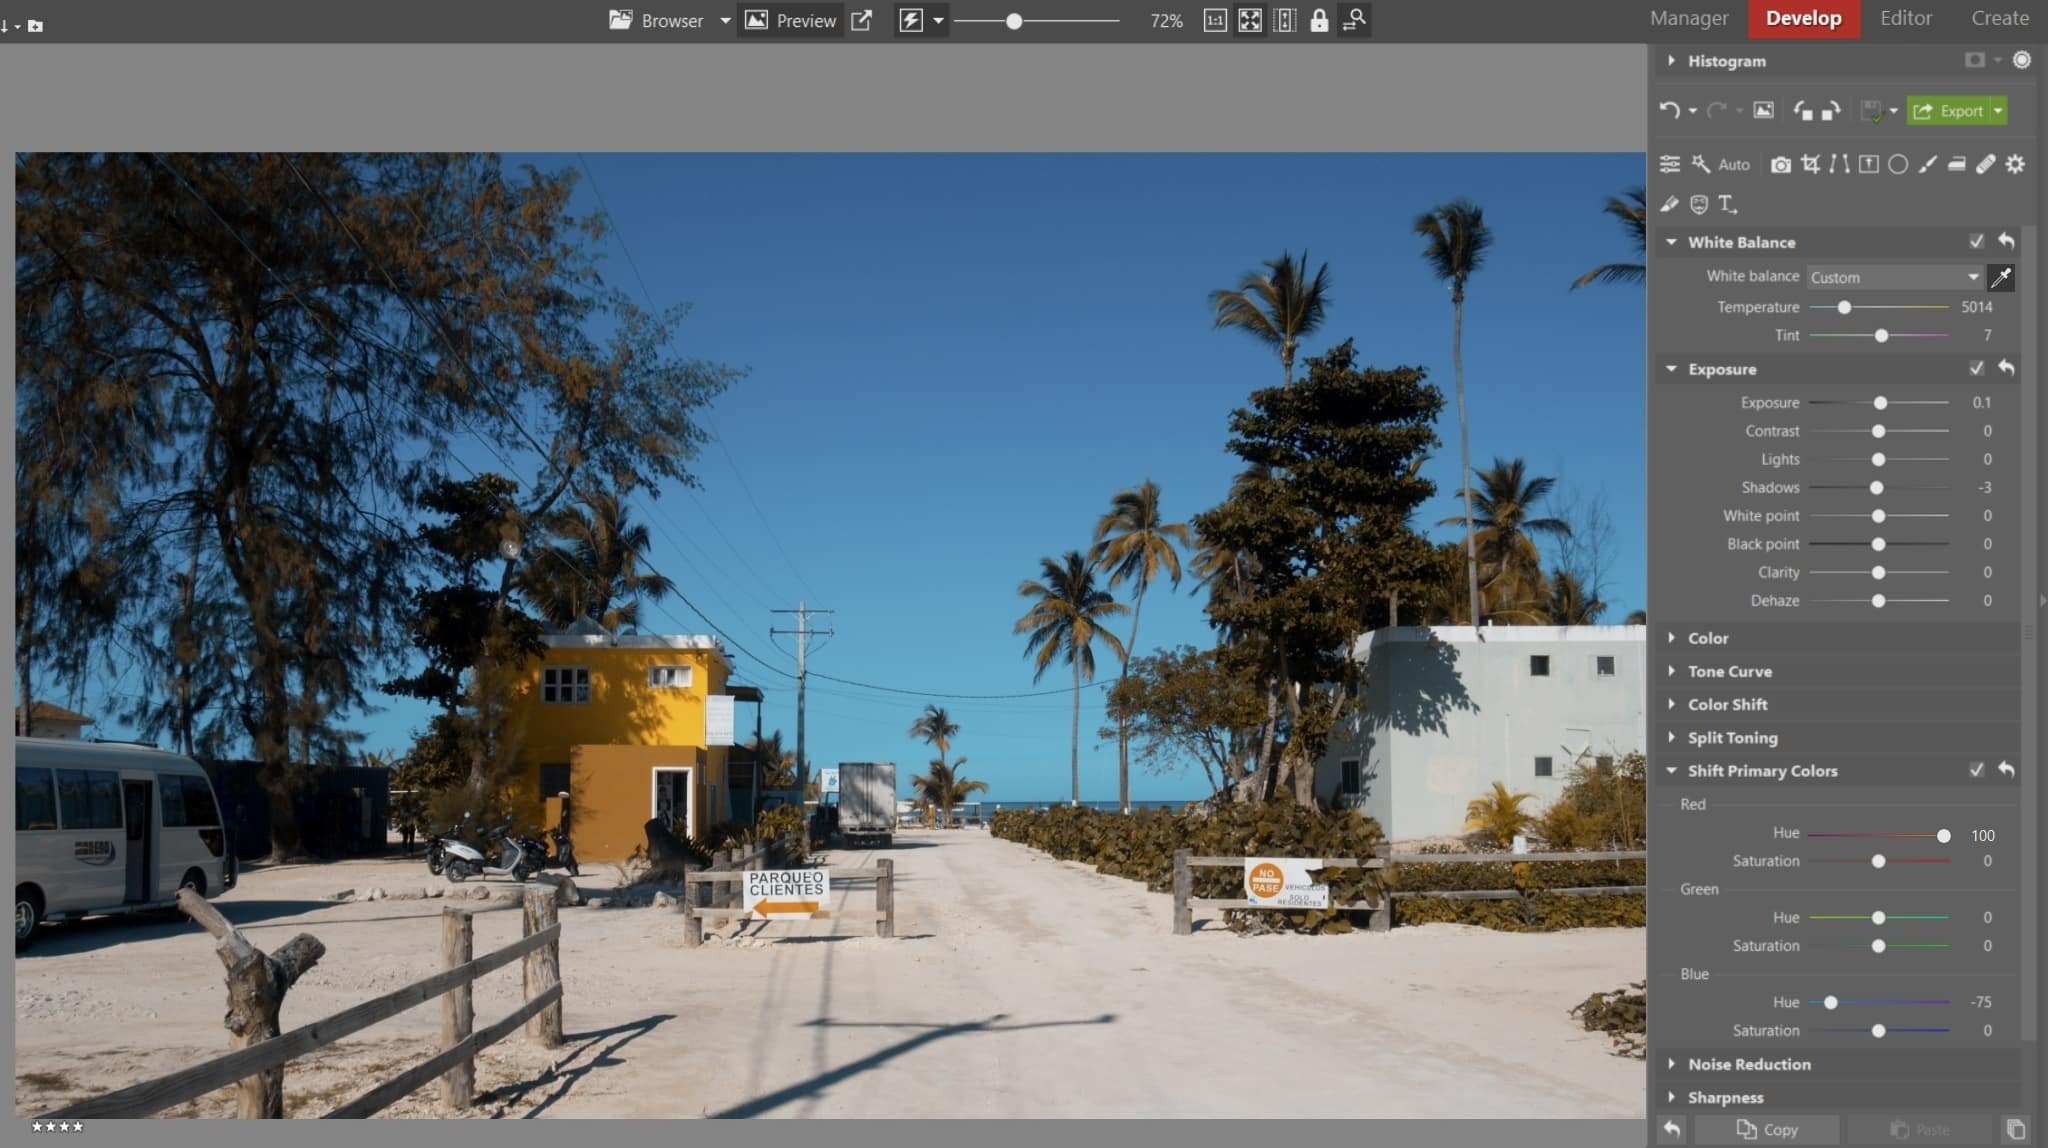 Color grading step-by-step III: How to get the popular Teal & Orange look